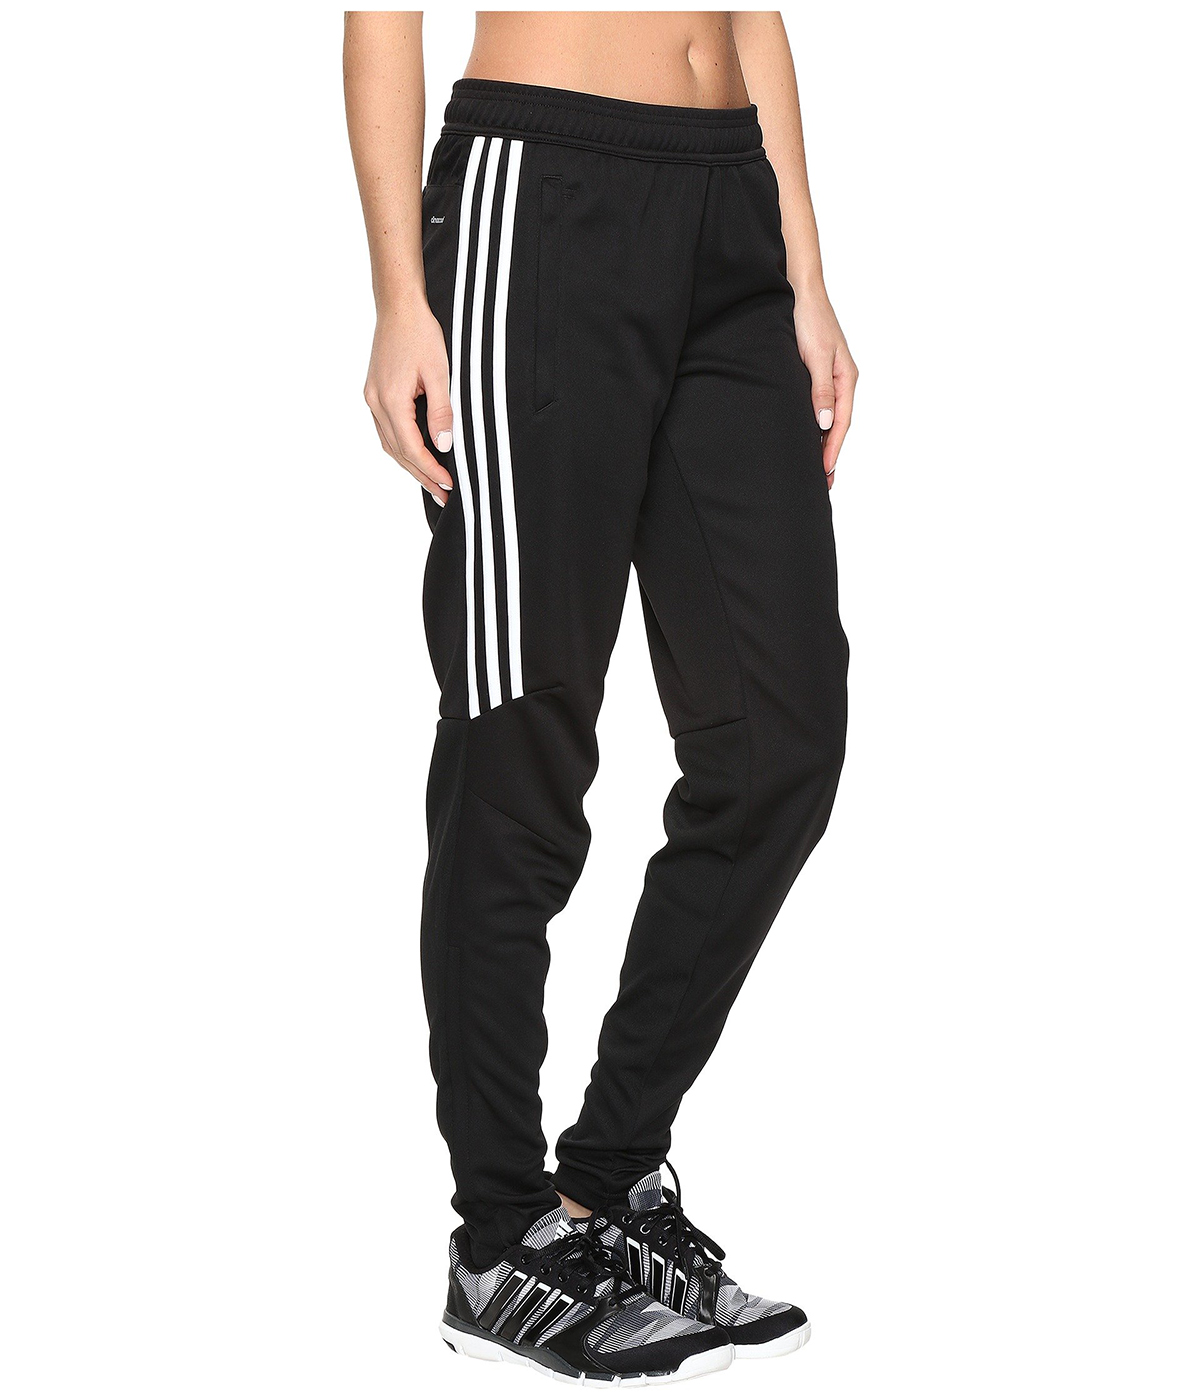 what are those adidas pants everyone wears